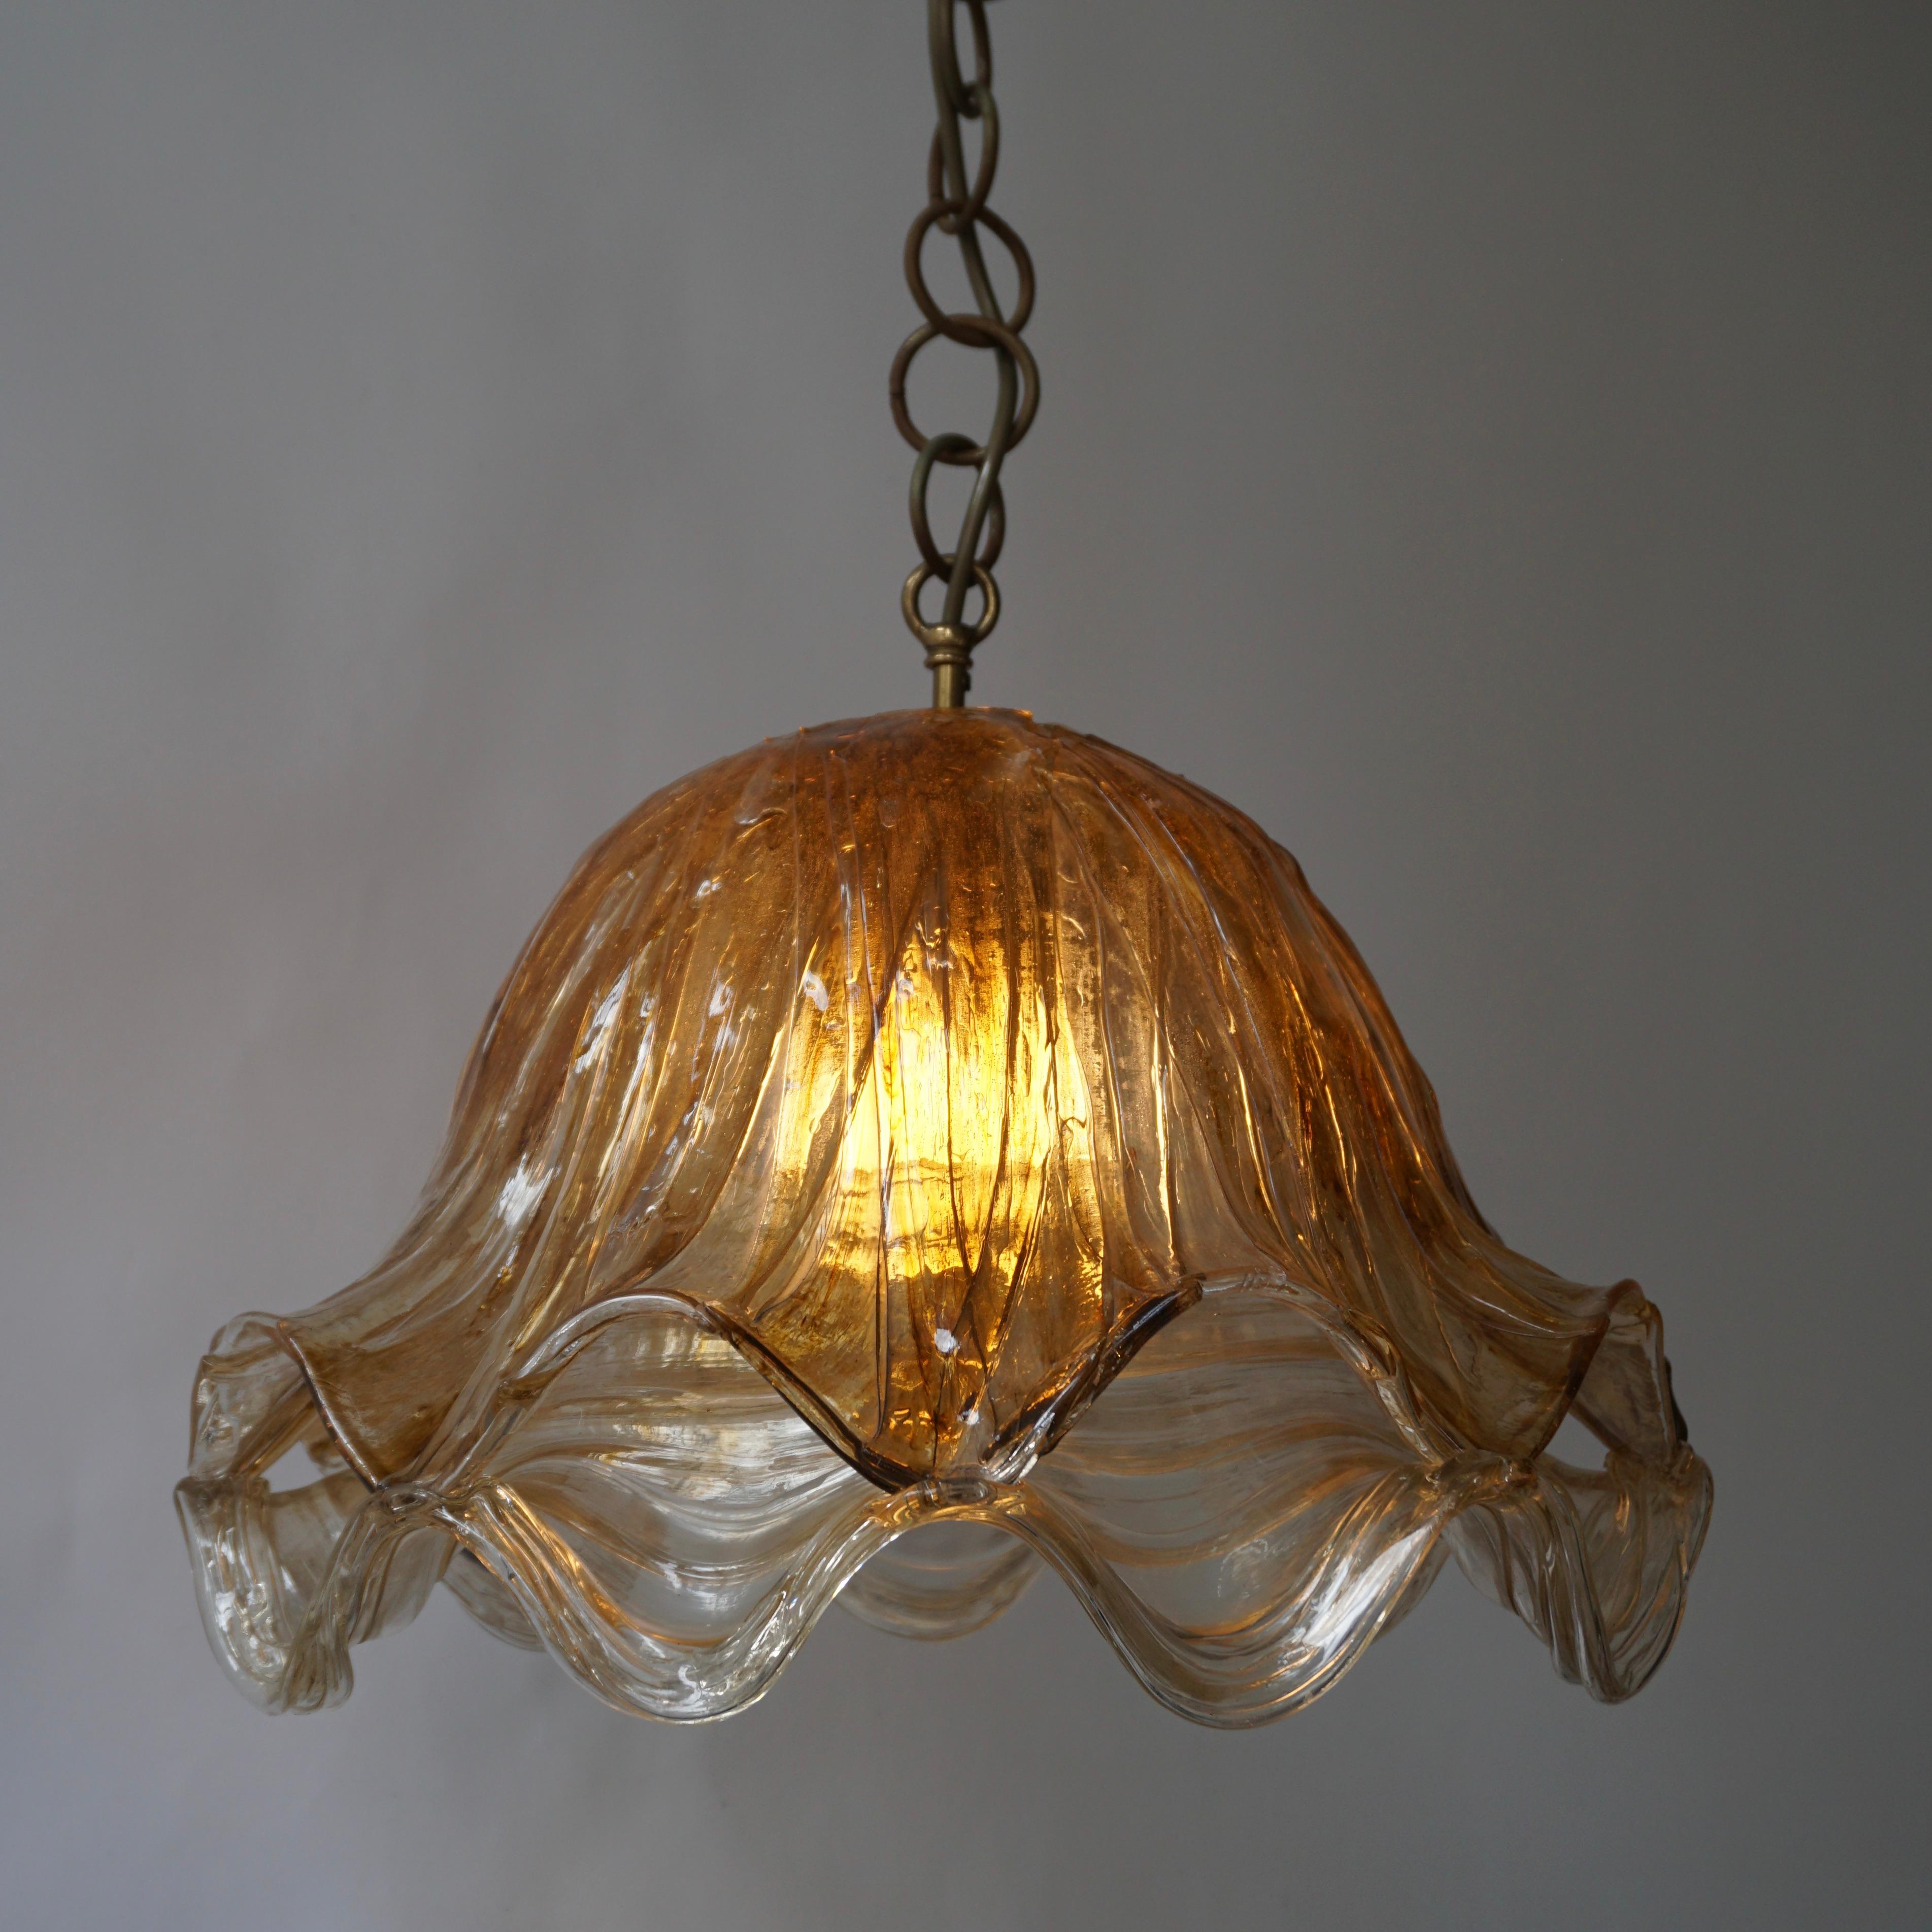 Brown and Transparent Acrylic Pendant Lamp, 1970s For Sale 6